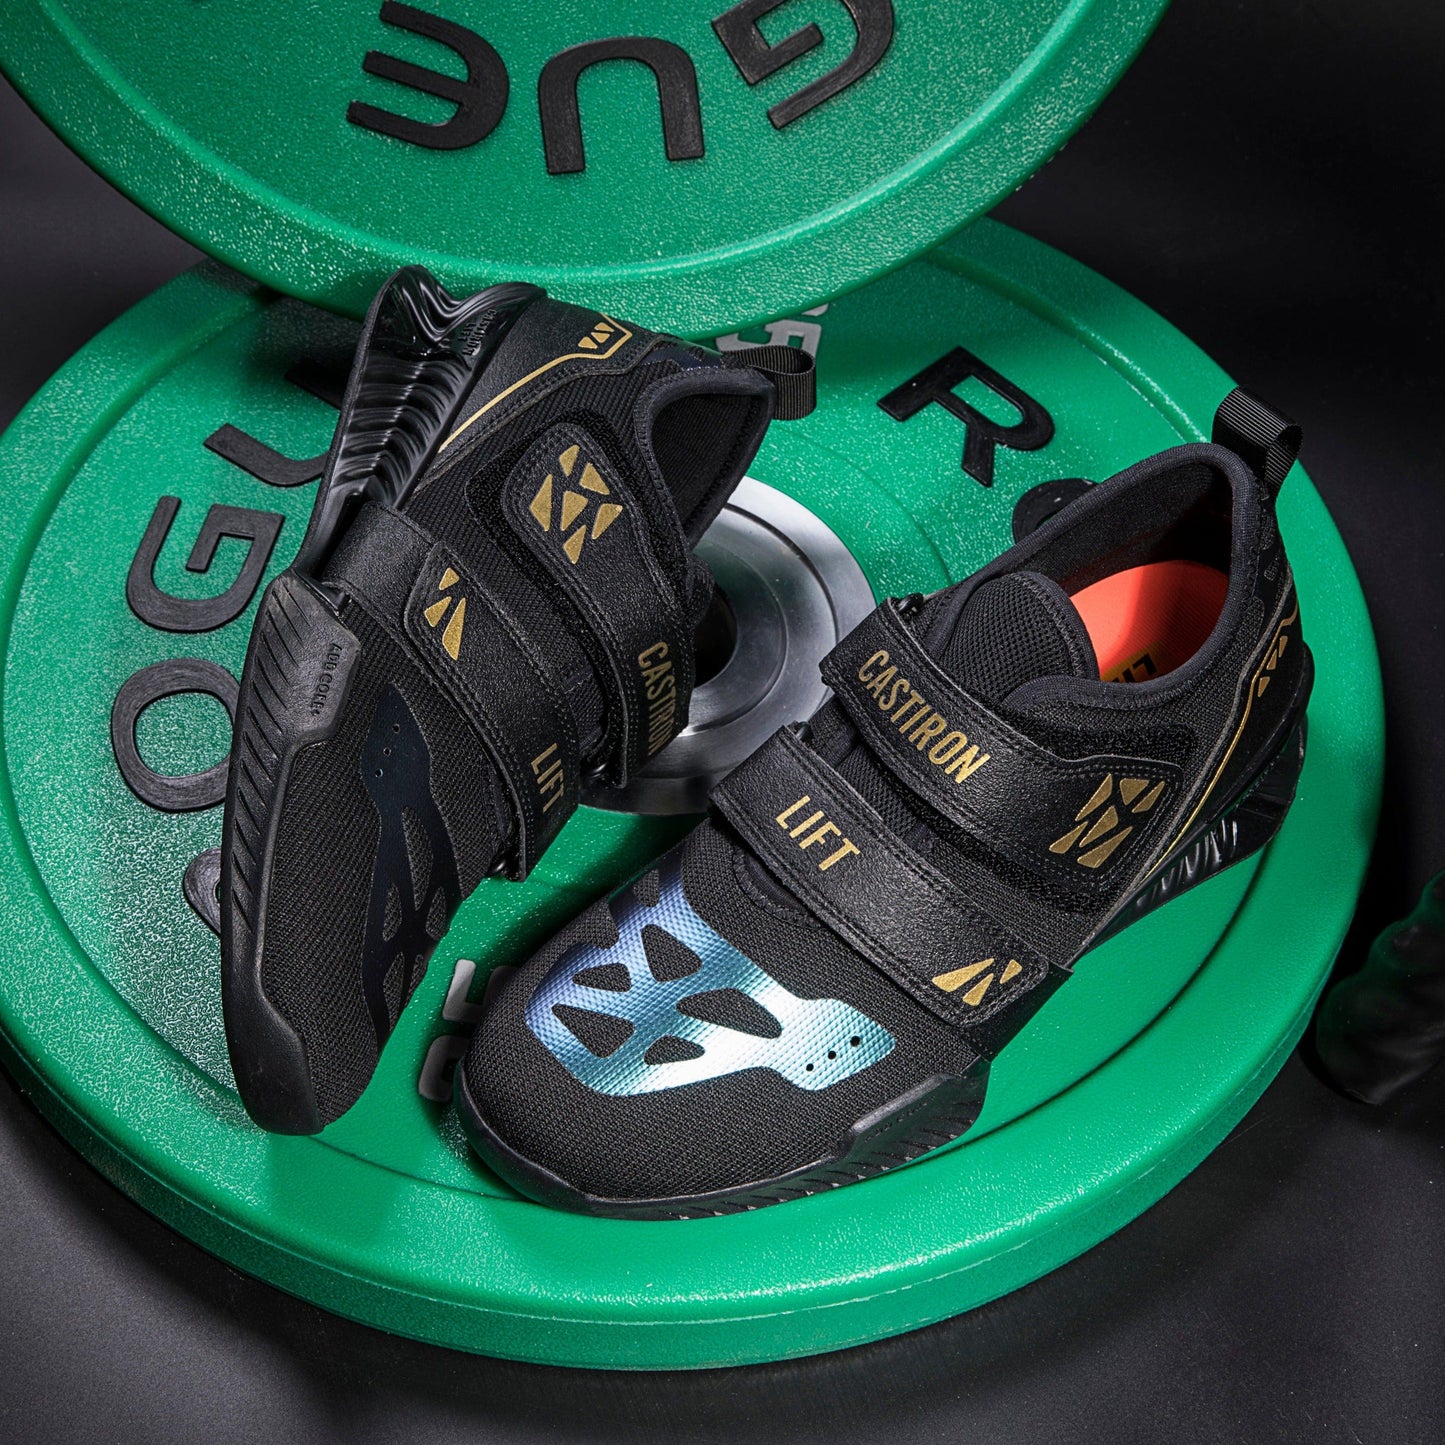 Unisex Weightlifting Shoes | Best Weightlifting Shoes | Castiron Lift